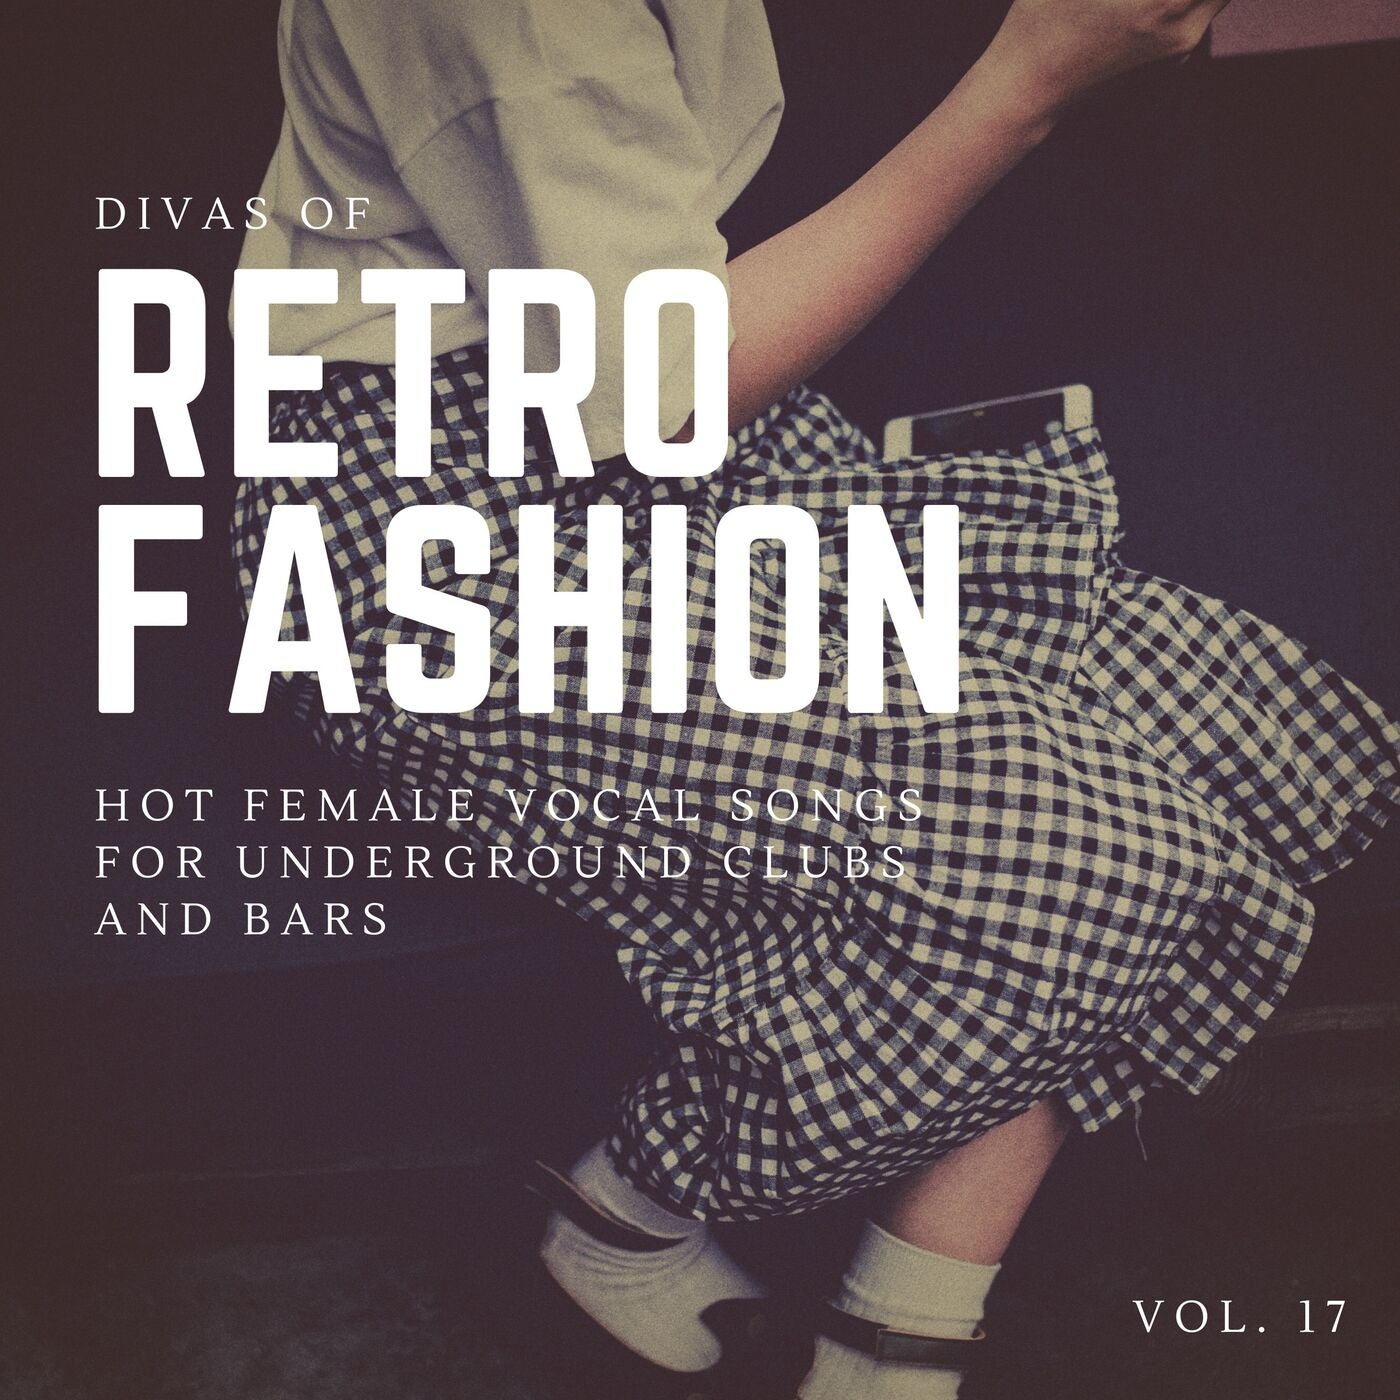 Divas Of Retro Fashion - Hot Female Vocal Songs For Underground Clubs And Bars, Vol. 17